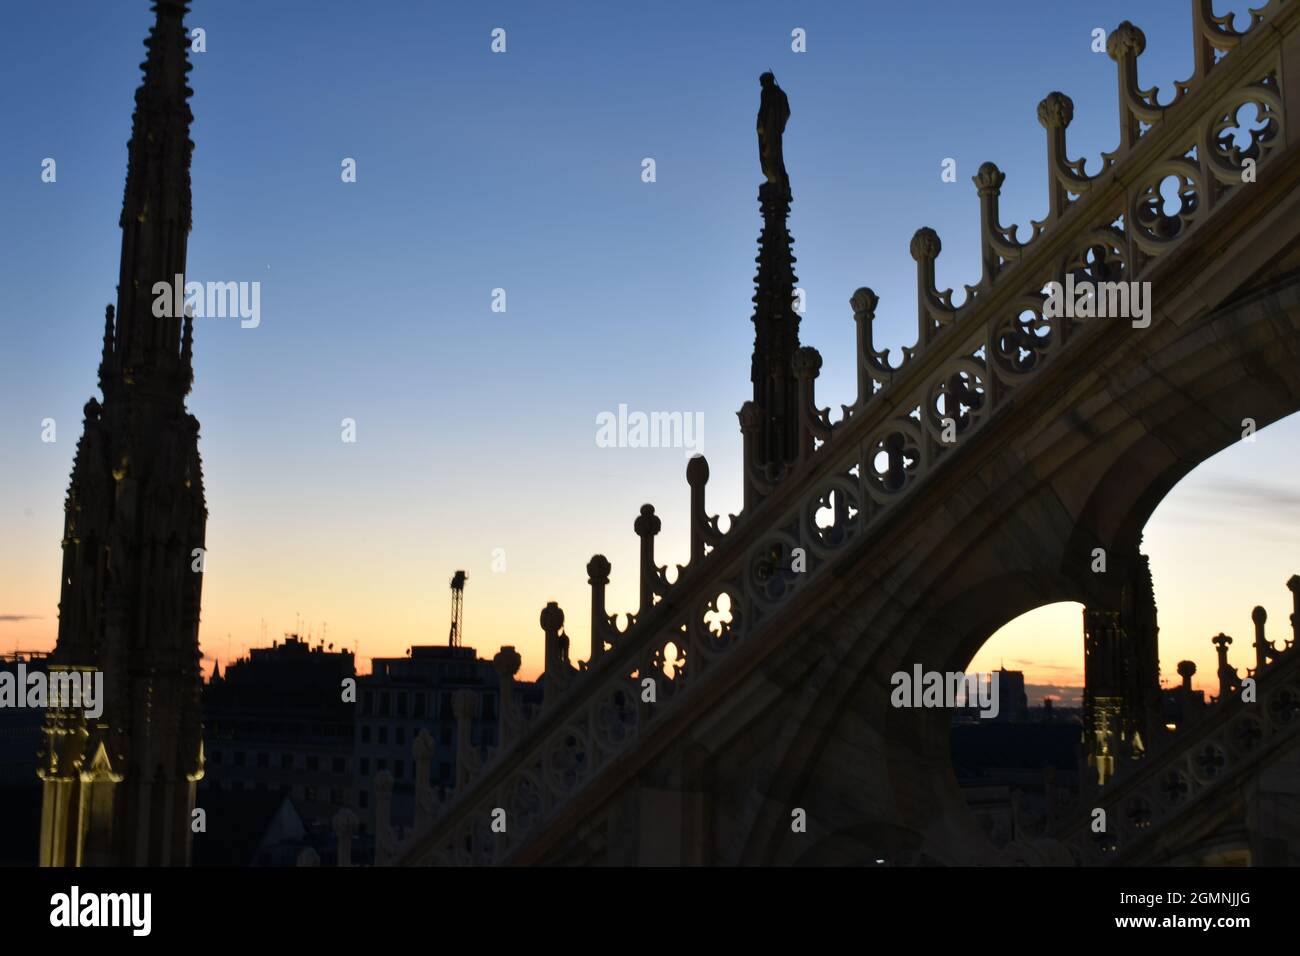 Sunset in background from rooftop of Duomo Di Milano Stock Photo